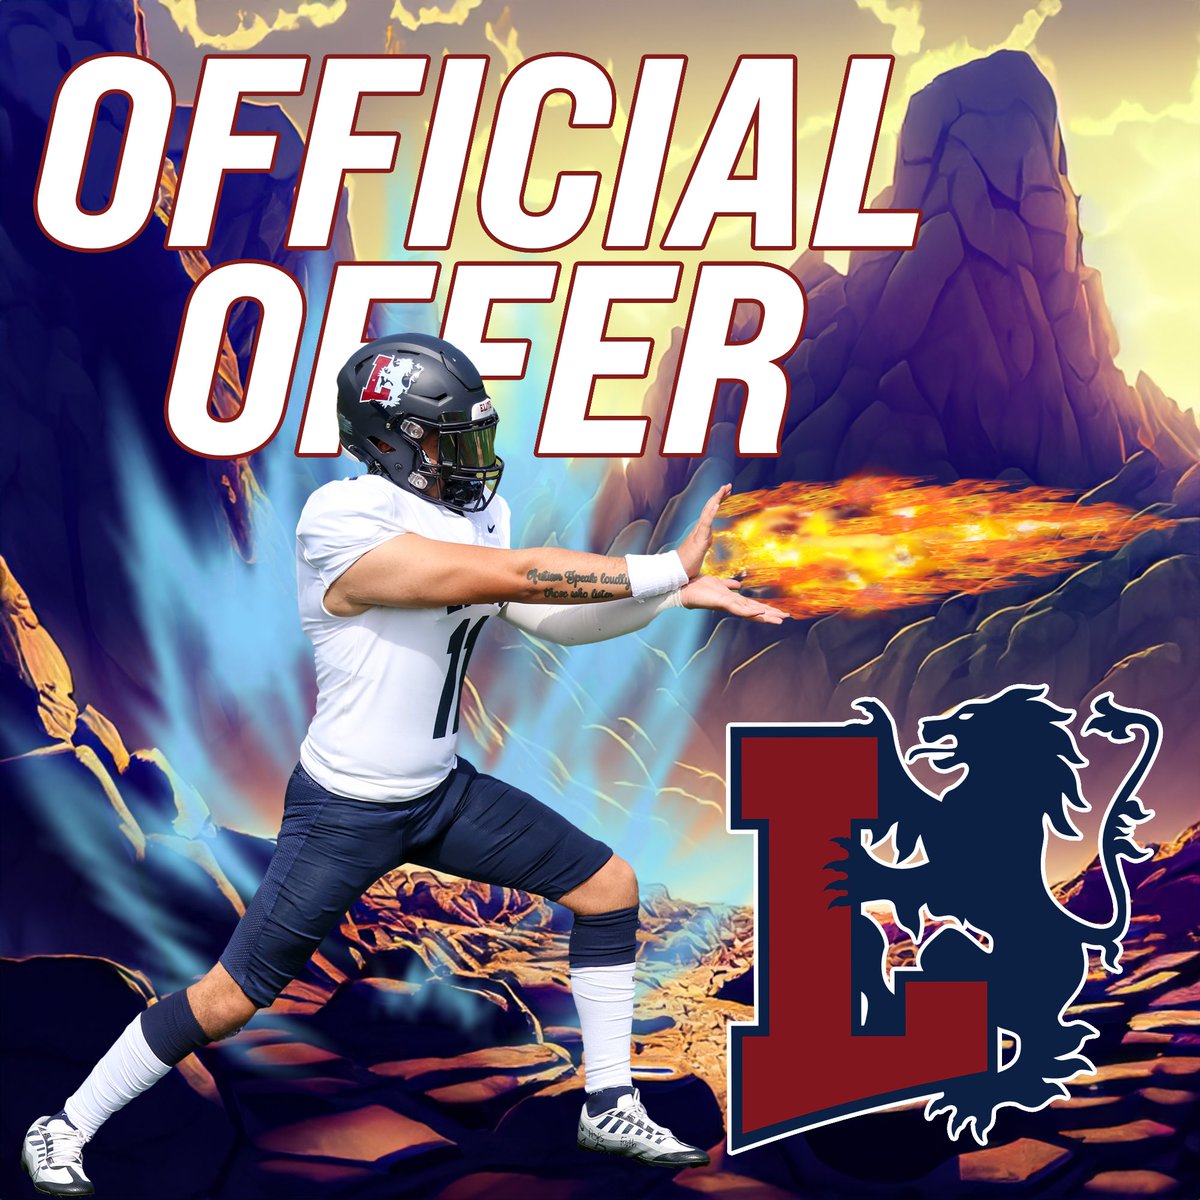 After a great phone call with @LyonHBC and @Coach_K_Goldman I am blessed to announce I've received my third offer to play at the next level from lyon college. @Blackhawks_FB